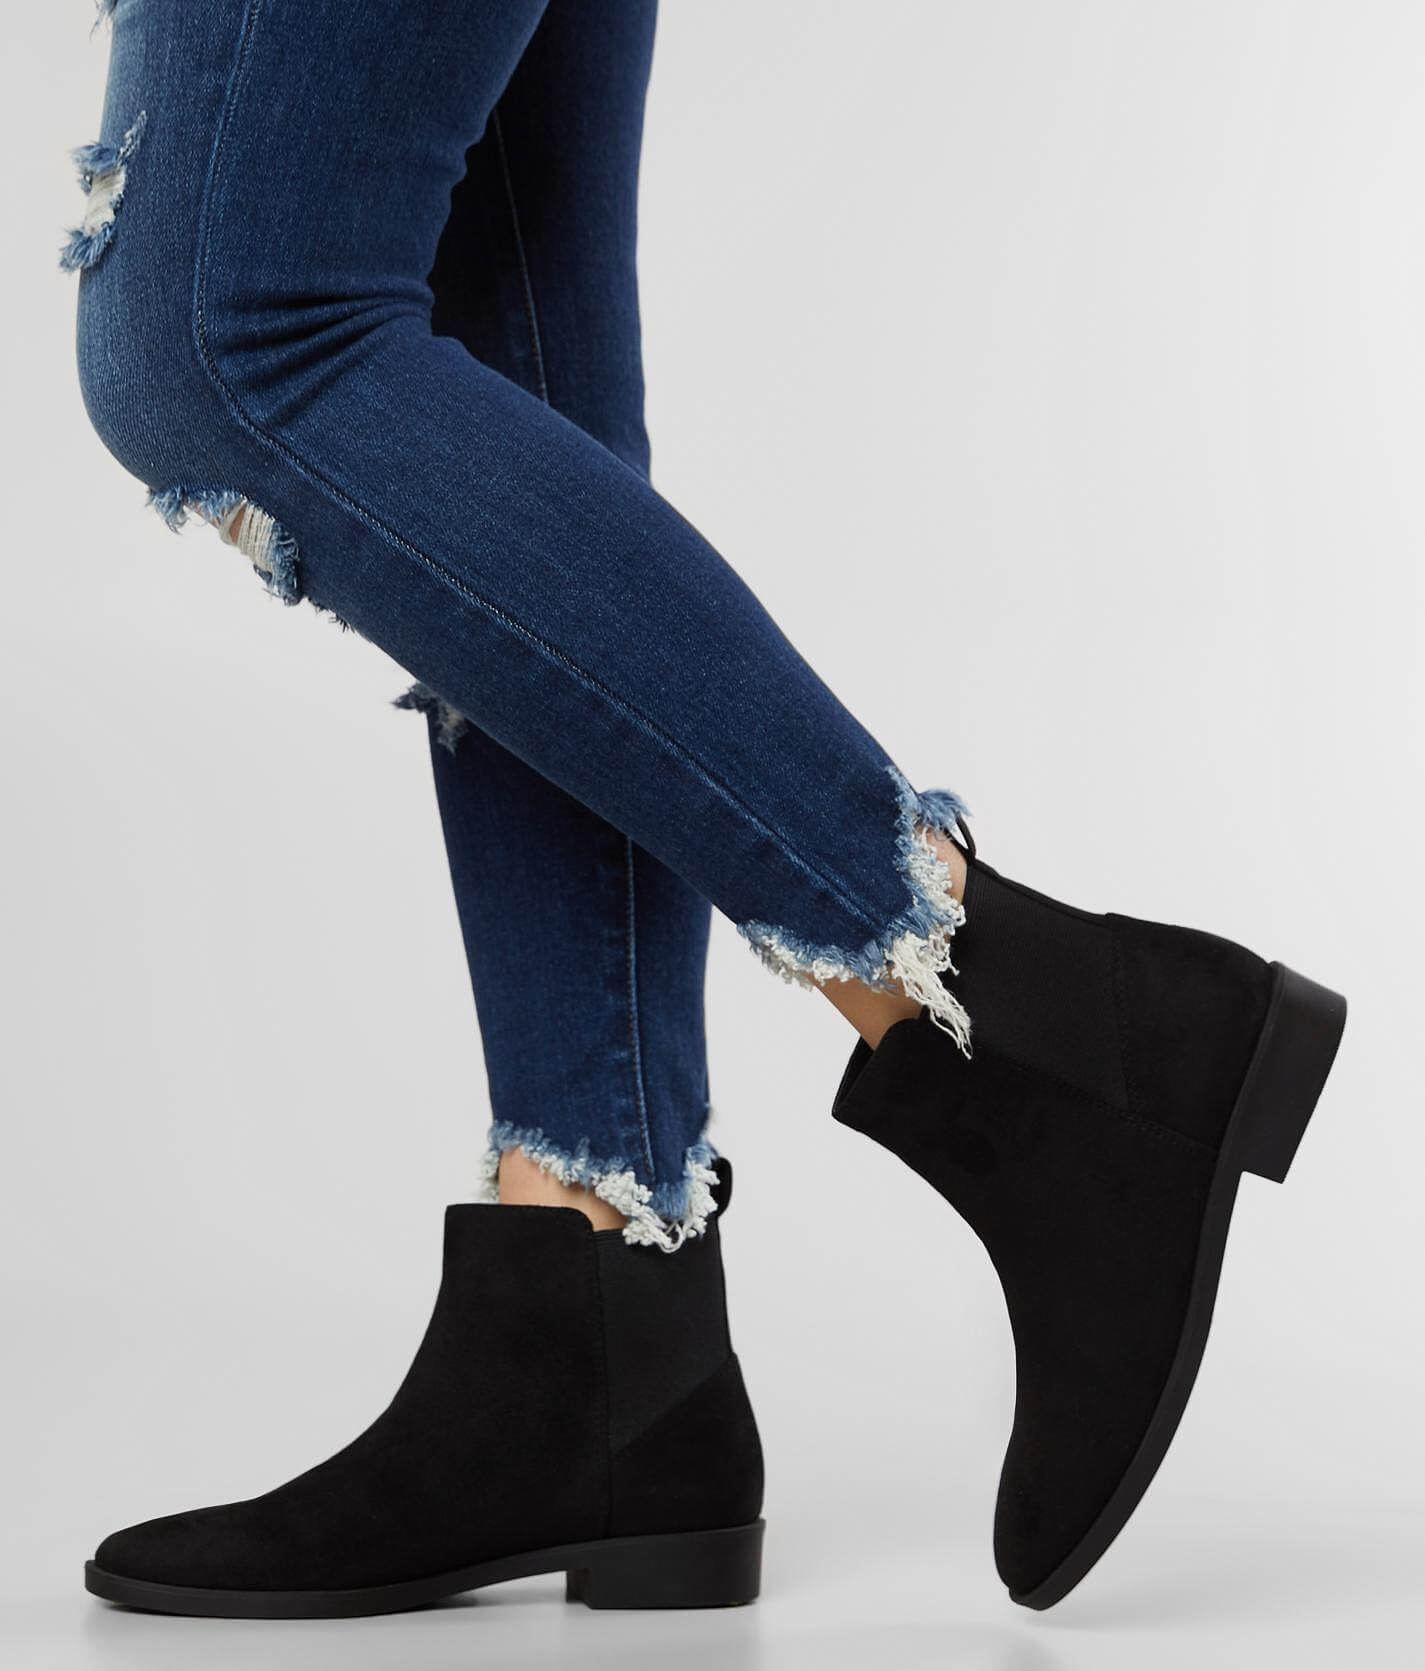 flat chelsea ankle boots womens